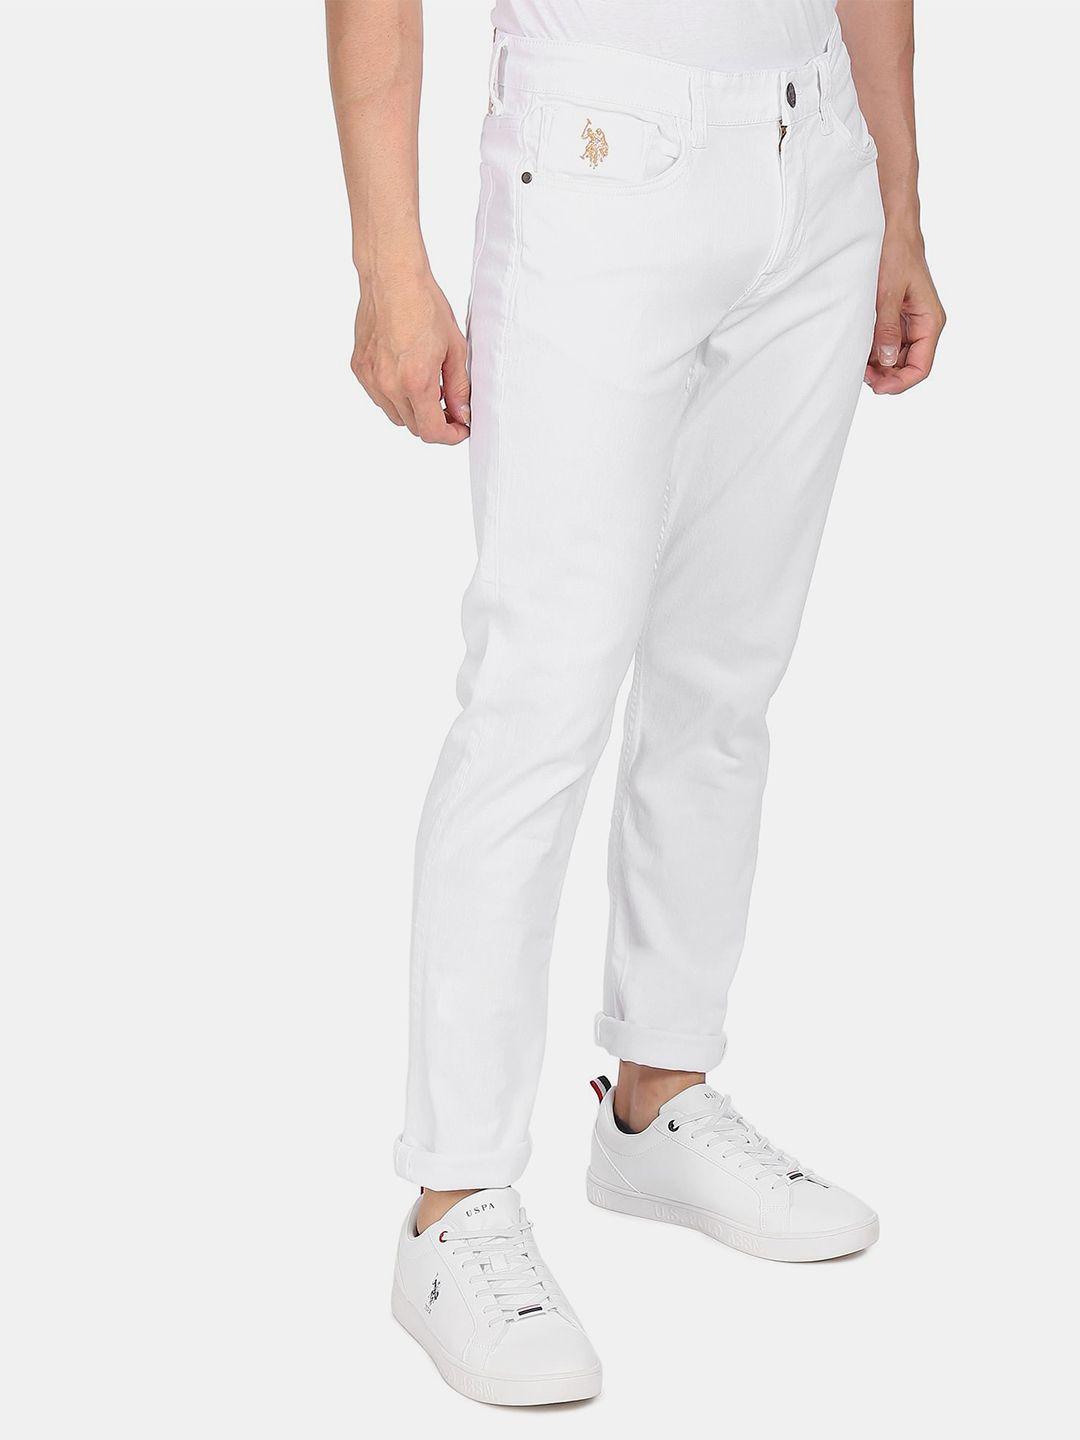 u.s. polo assn. denim co. men white tapered fit solid jeans